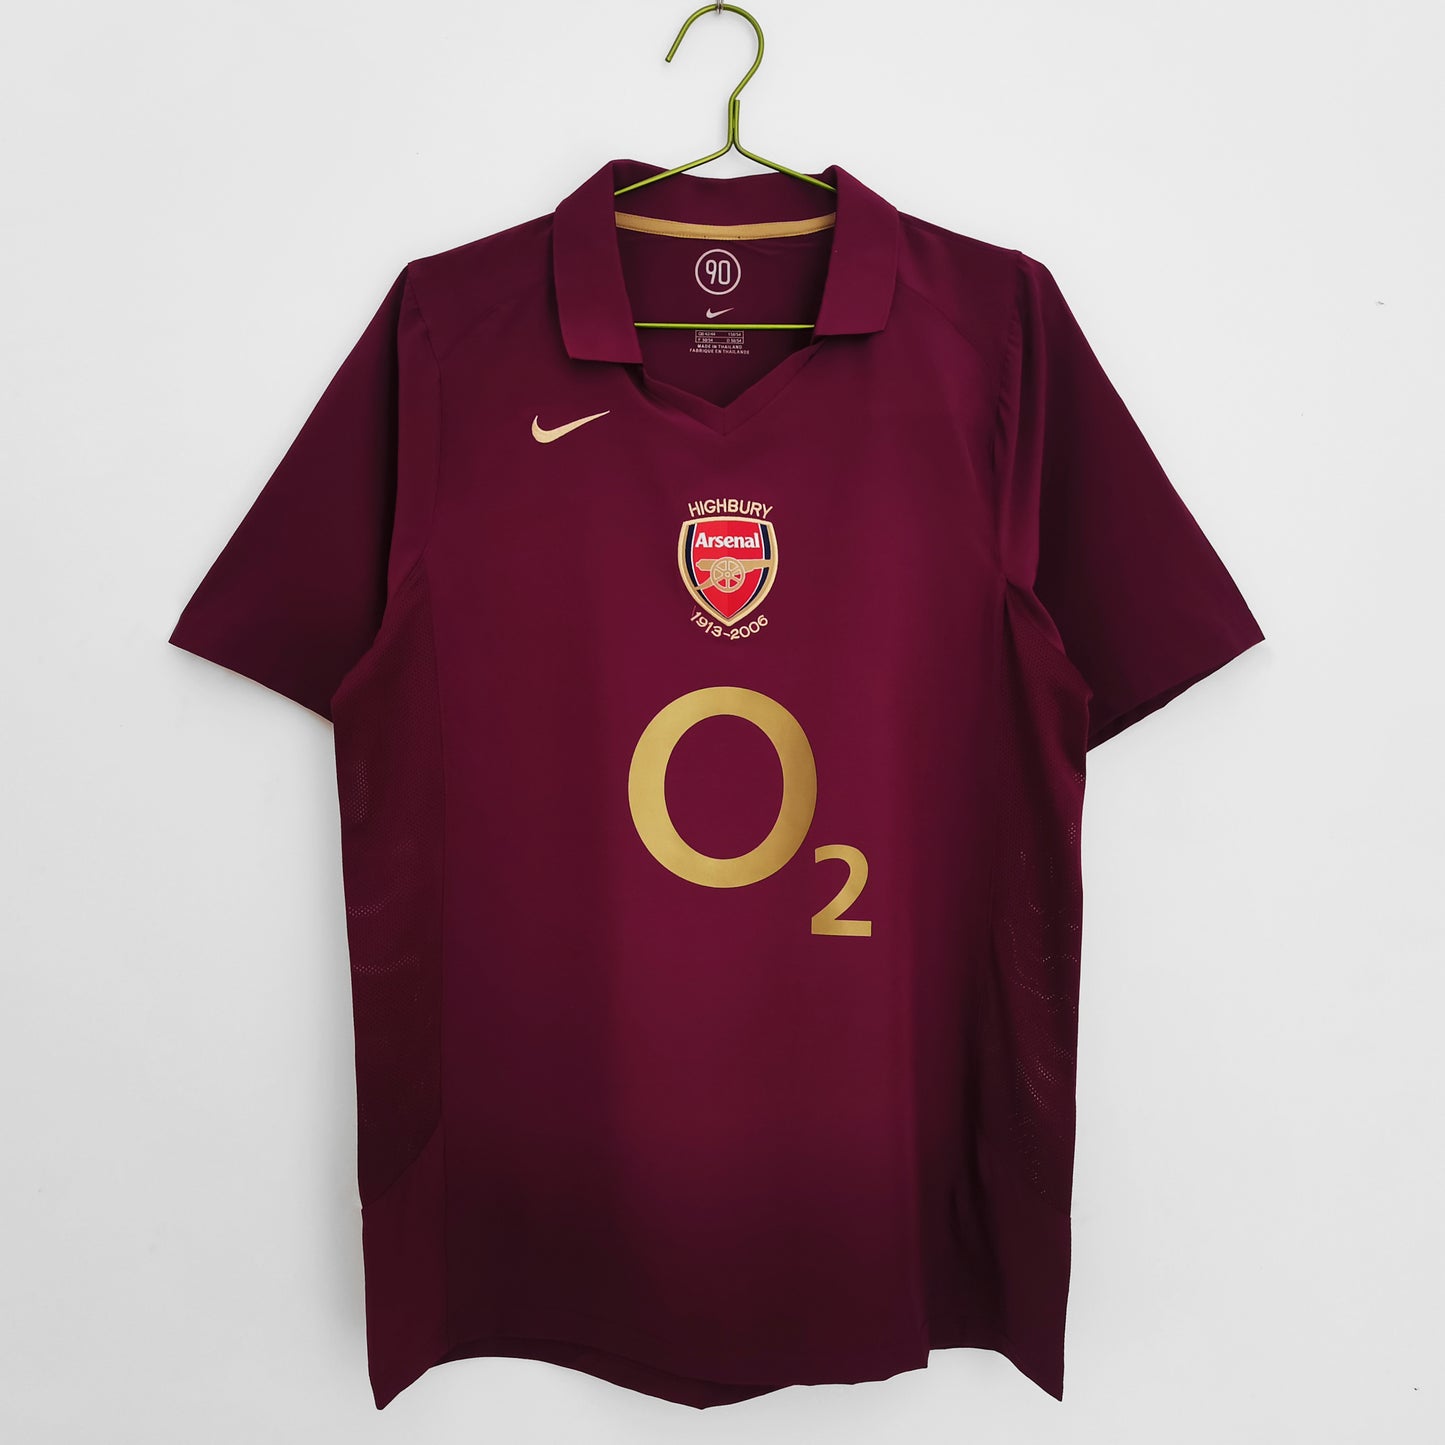 Arsenal 05/06 Home Jersey